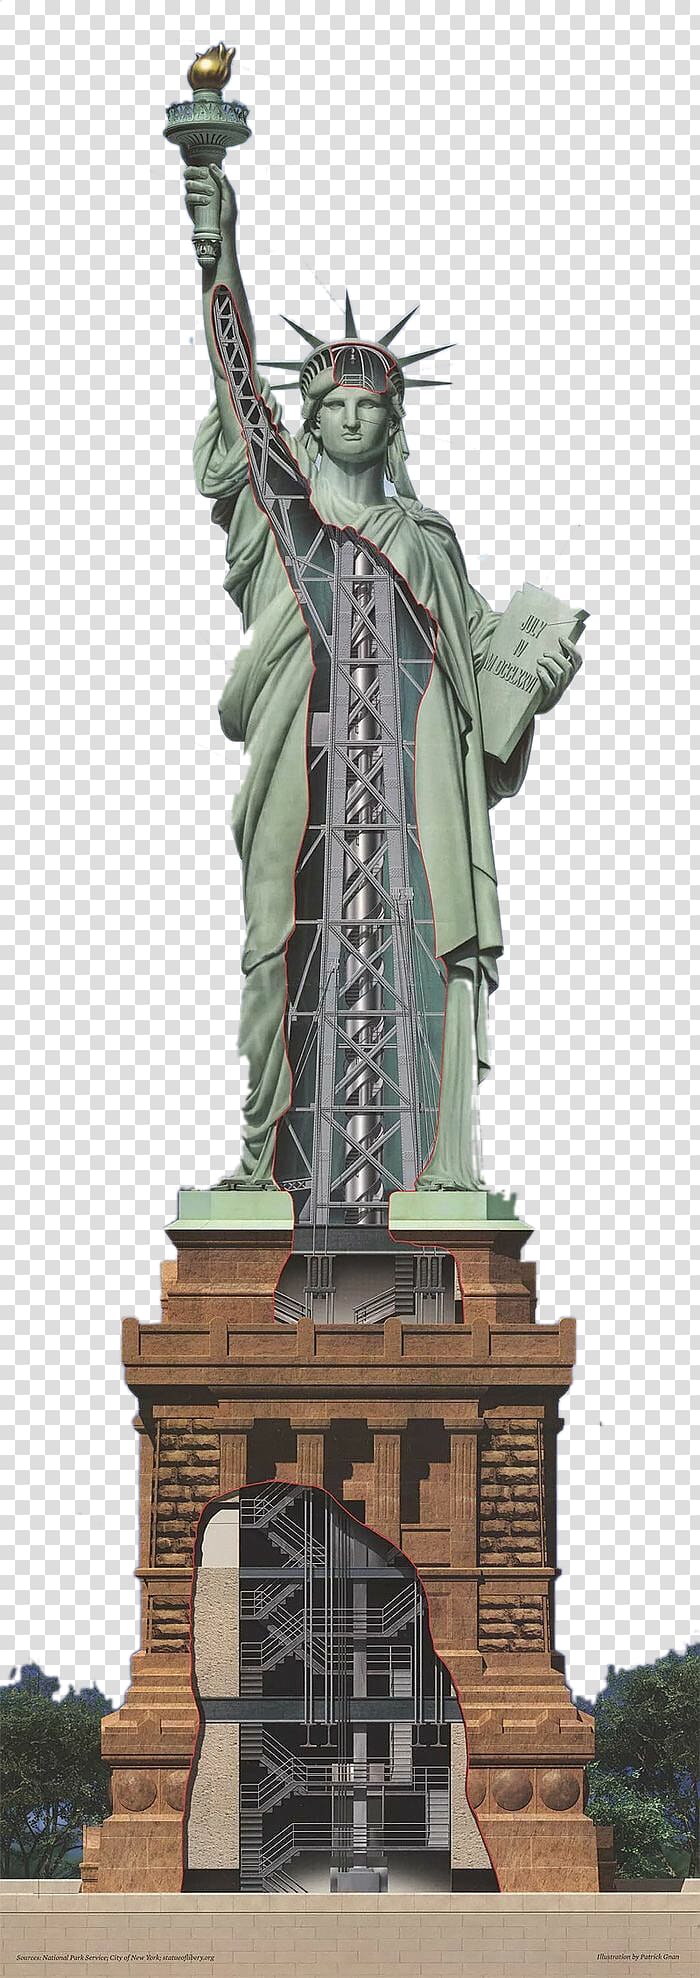 Statue of Liberty One World Trade Center Hudson River Ellis Island The New Colossus, Statue of Liberty transparent background PNG clipart